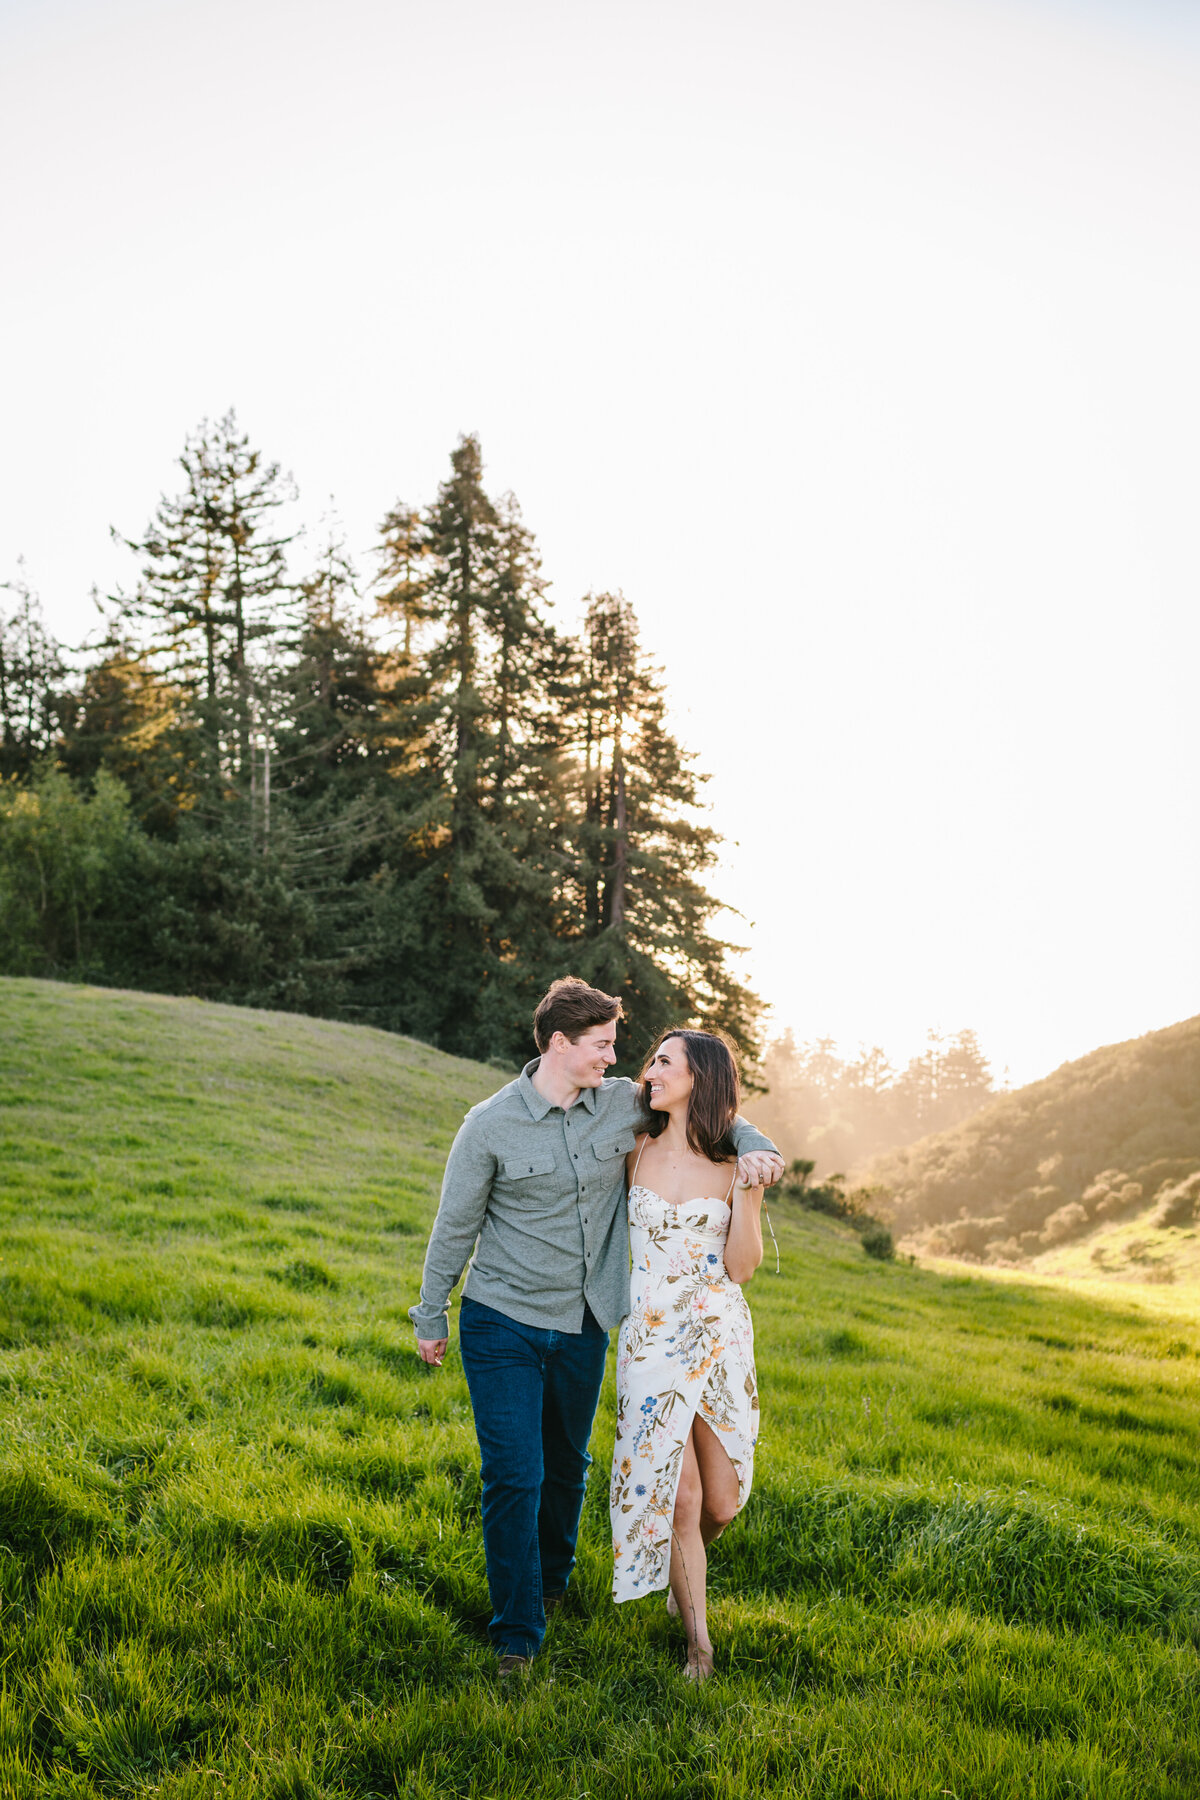 Best California and Texas Engagement Photographer-Jodee Debes Photography-286